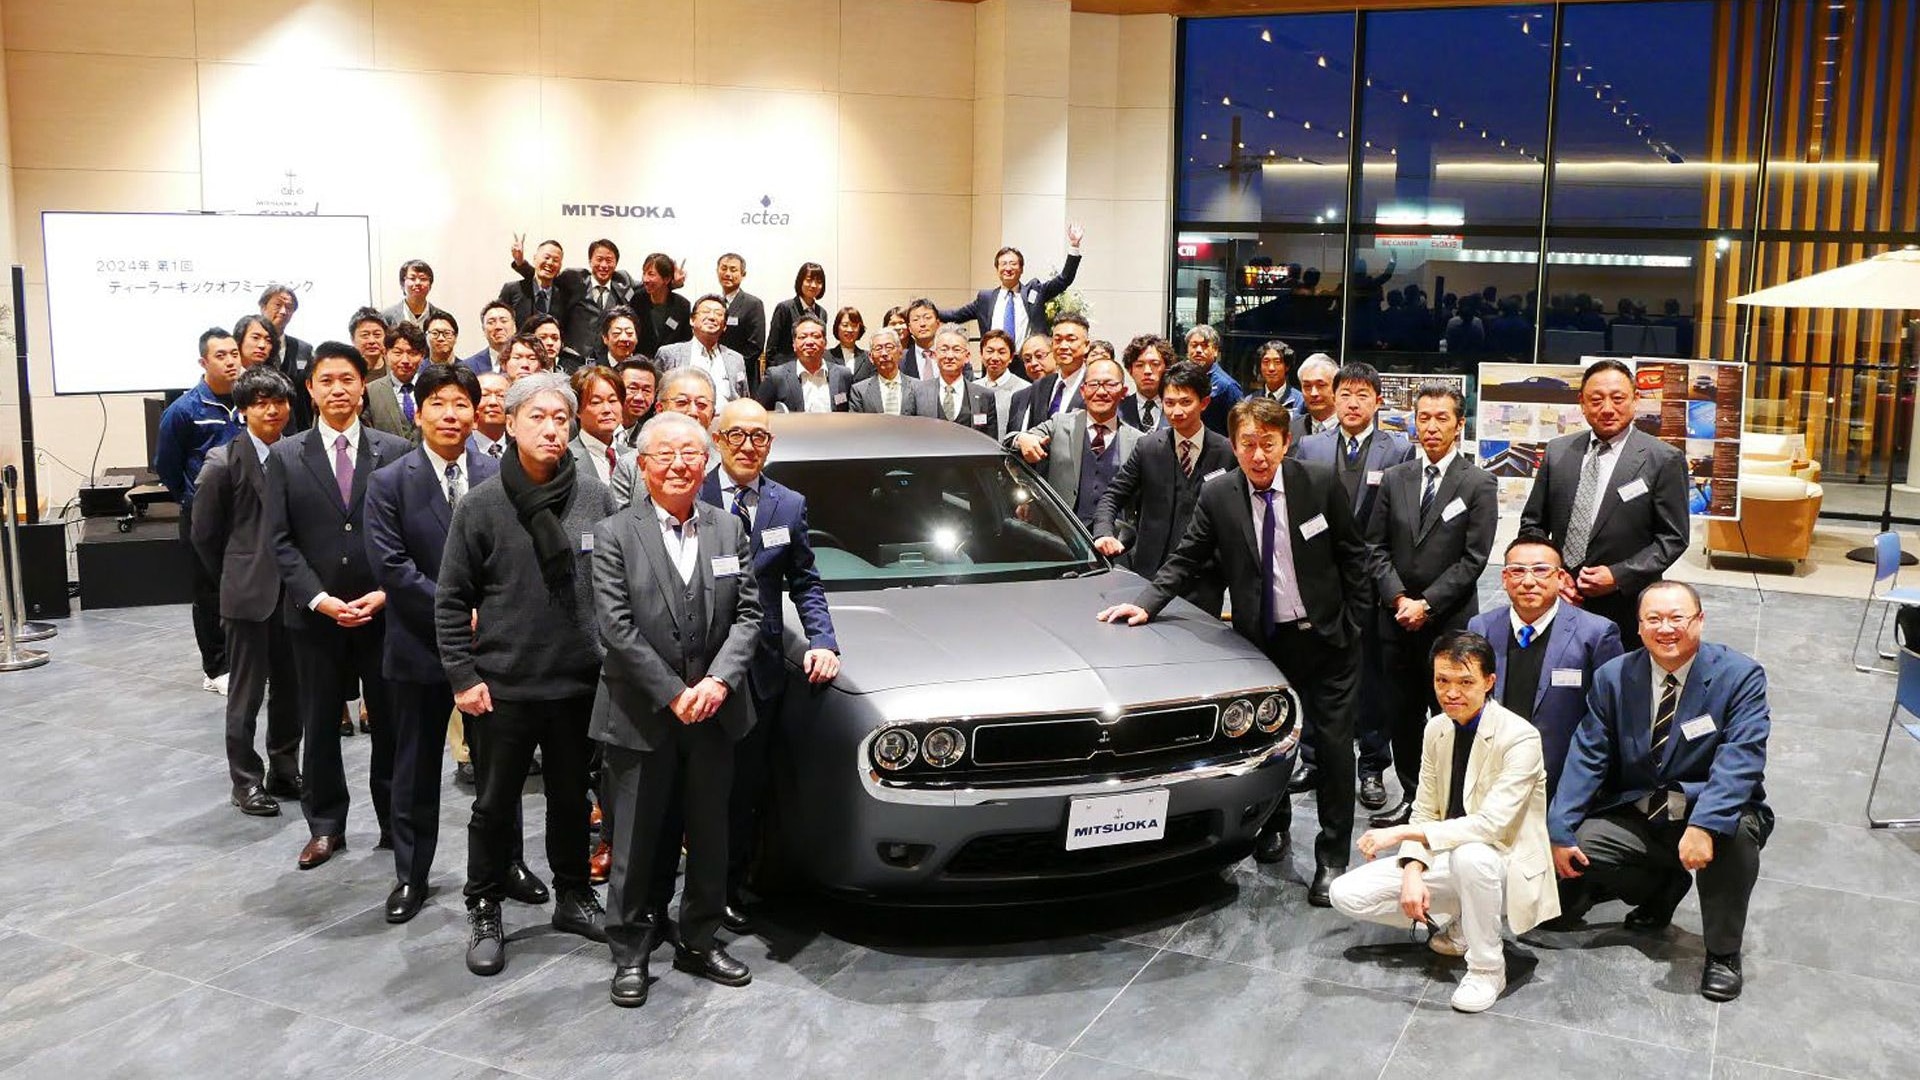 Mitsuoka team with the M55 concept